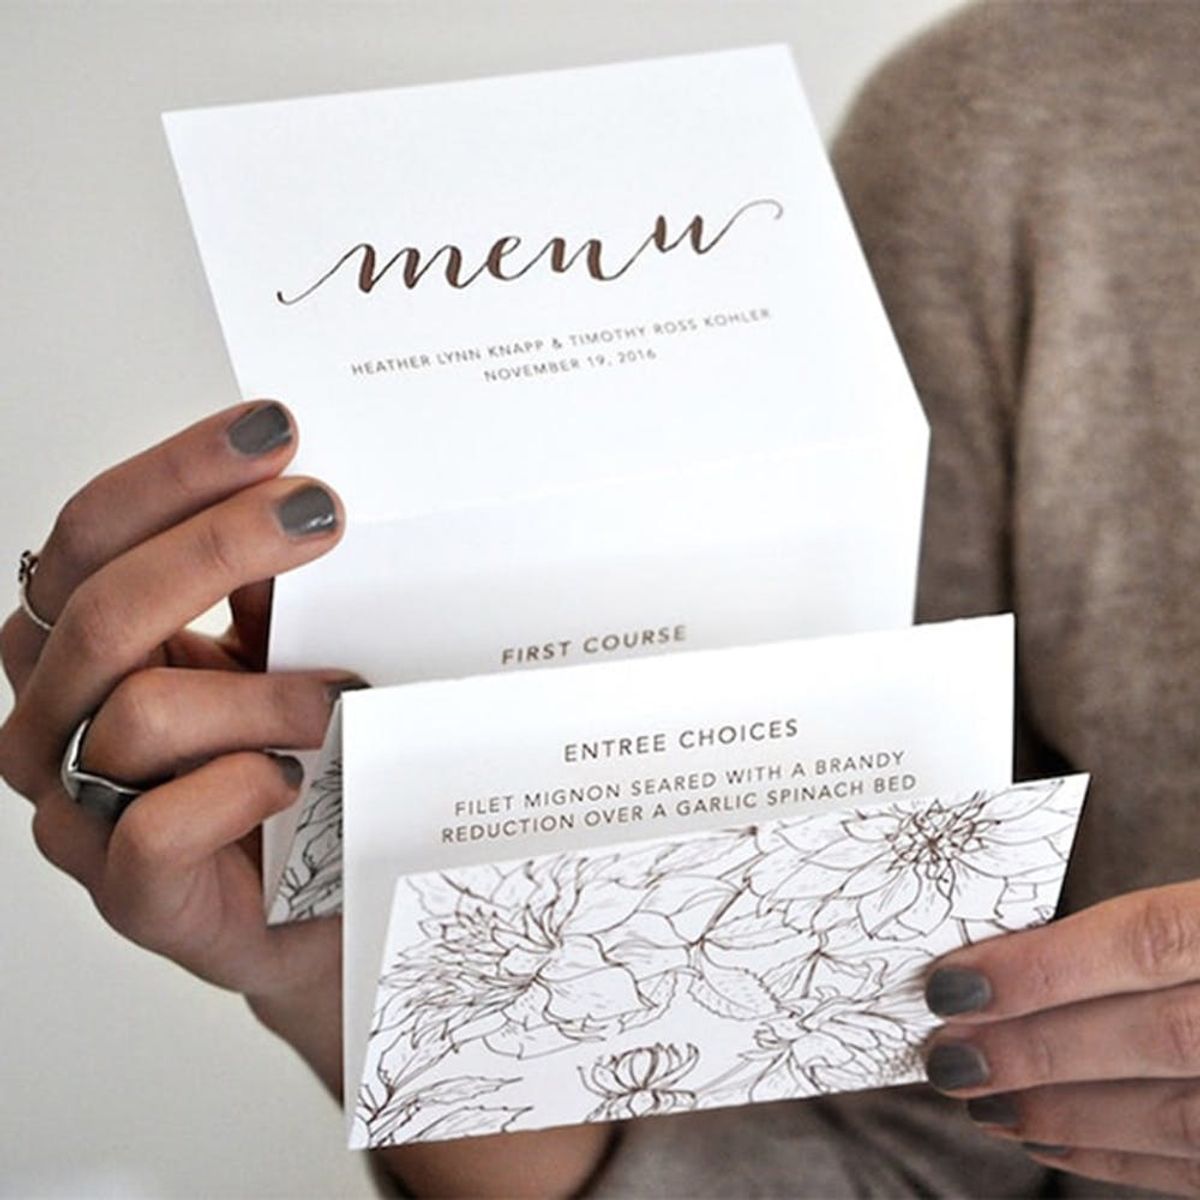 20 Modern Wedding Menu Ideas That Are Totally Unique